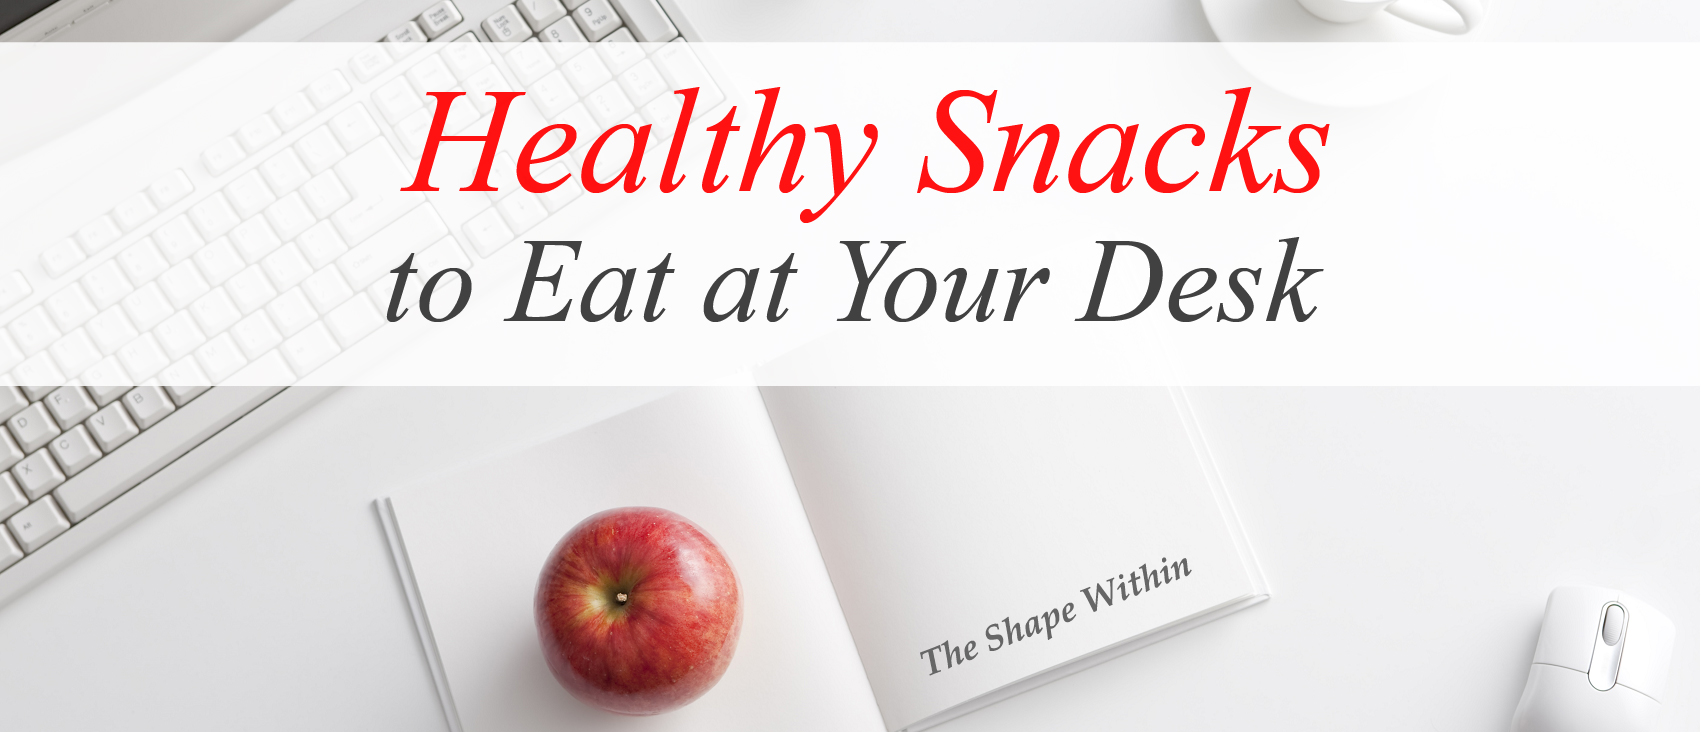 Healthy desk snacks that you can easily eat from work to lose weight